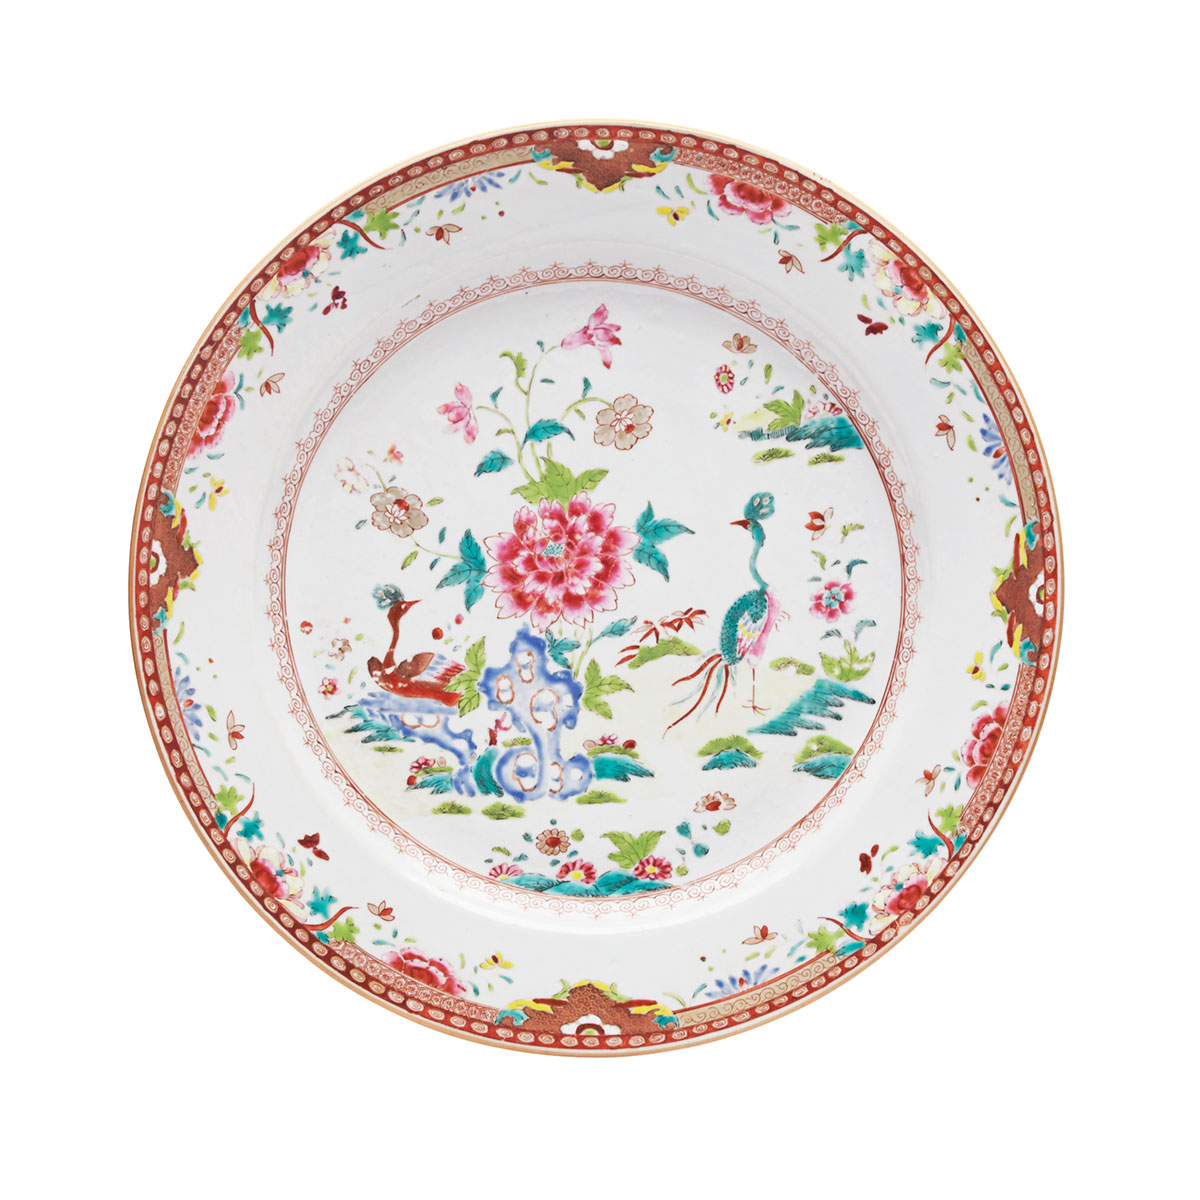 Large Export Famille Rose ‘Peacocks’ Plate, Yongzheng Period (1723-1735)